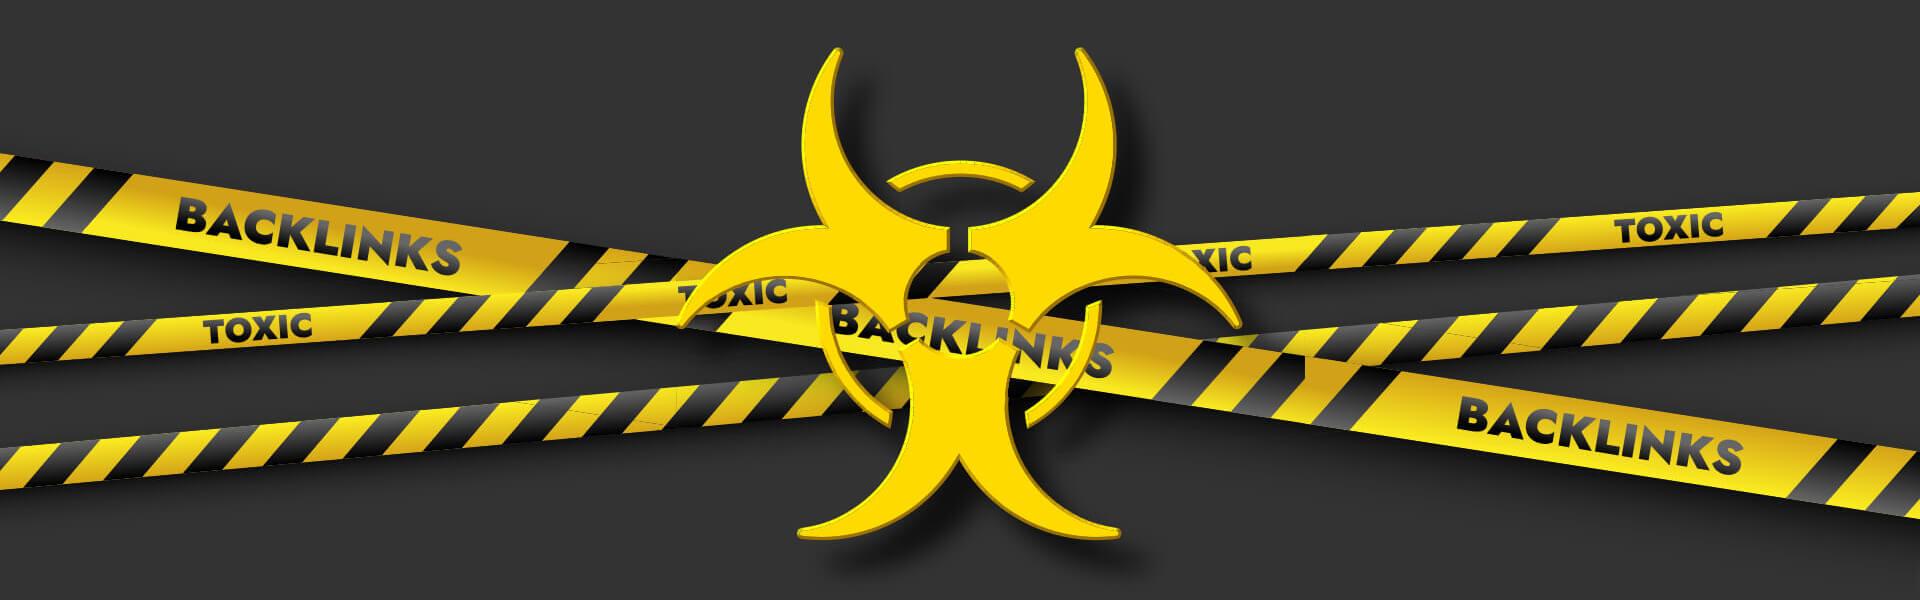 sign of toxic backlinks